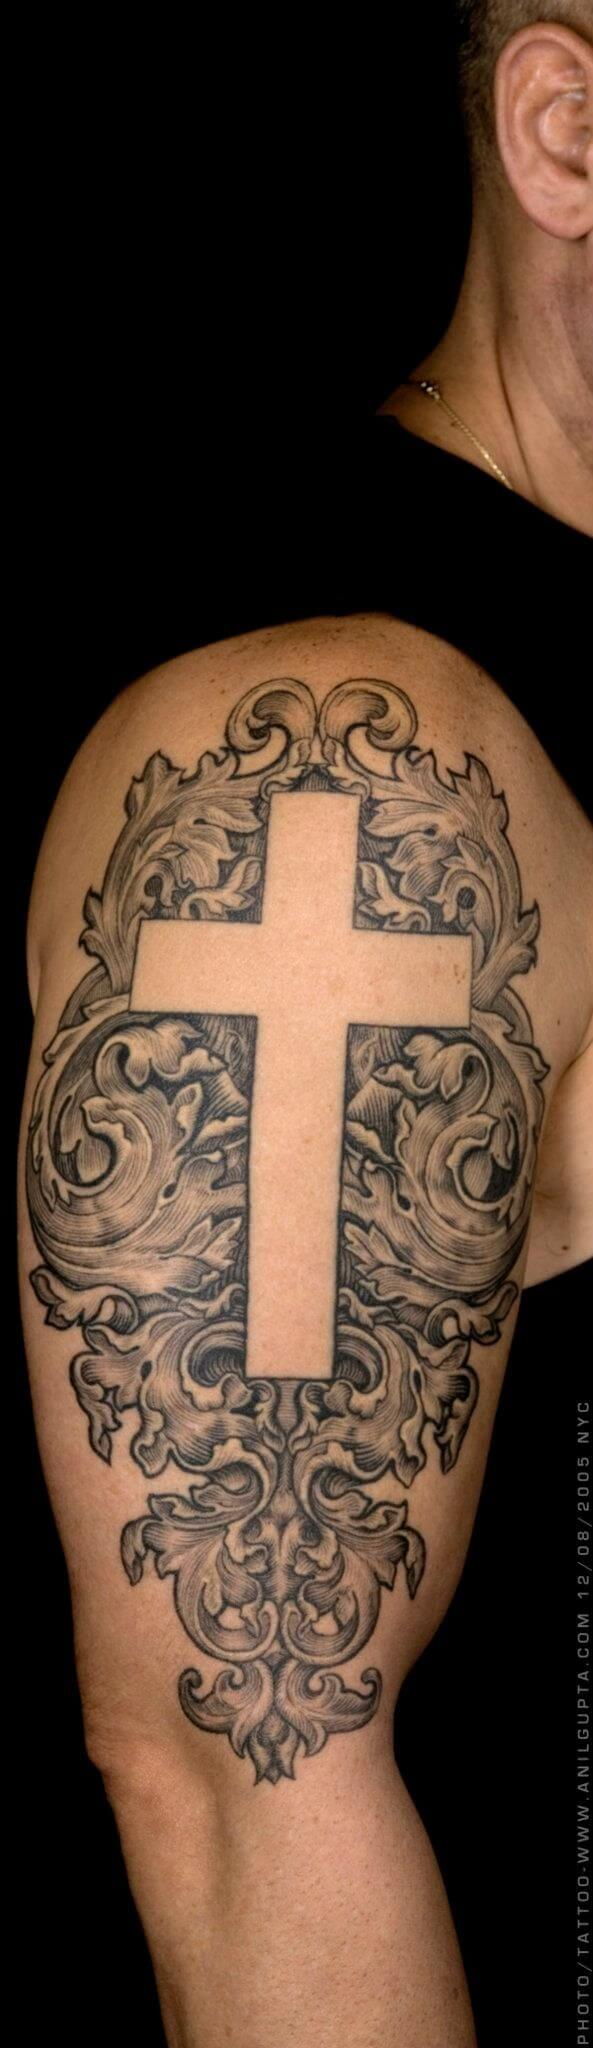 56 Best Cross Tattoos For Men Improb throughout proportions 593 X 2048